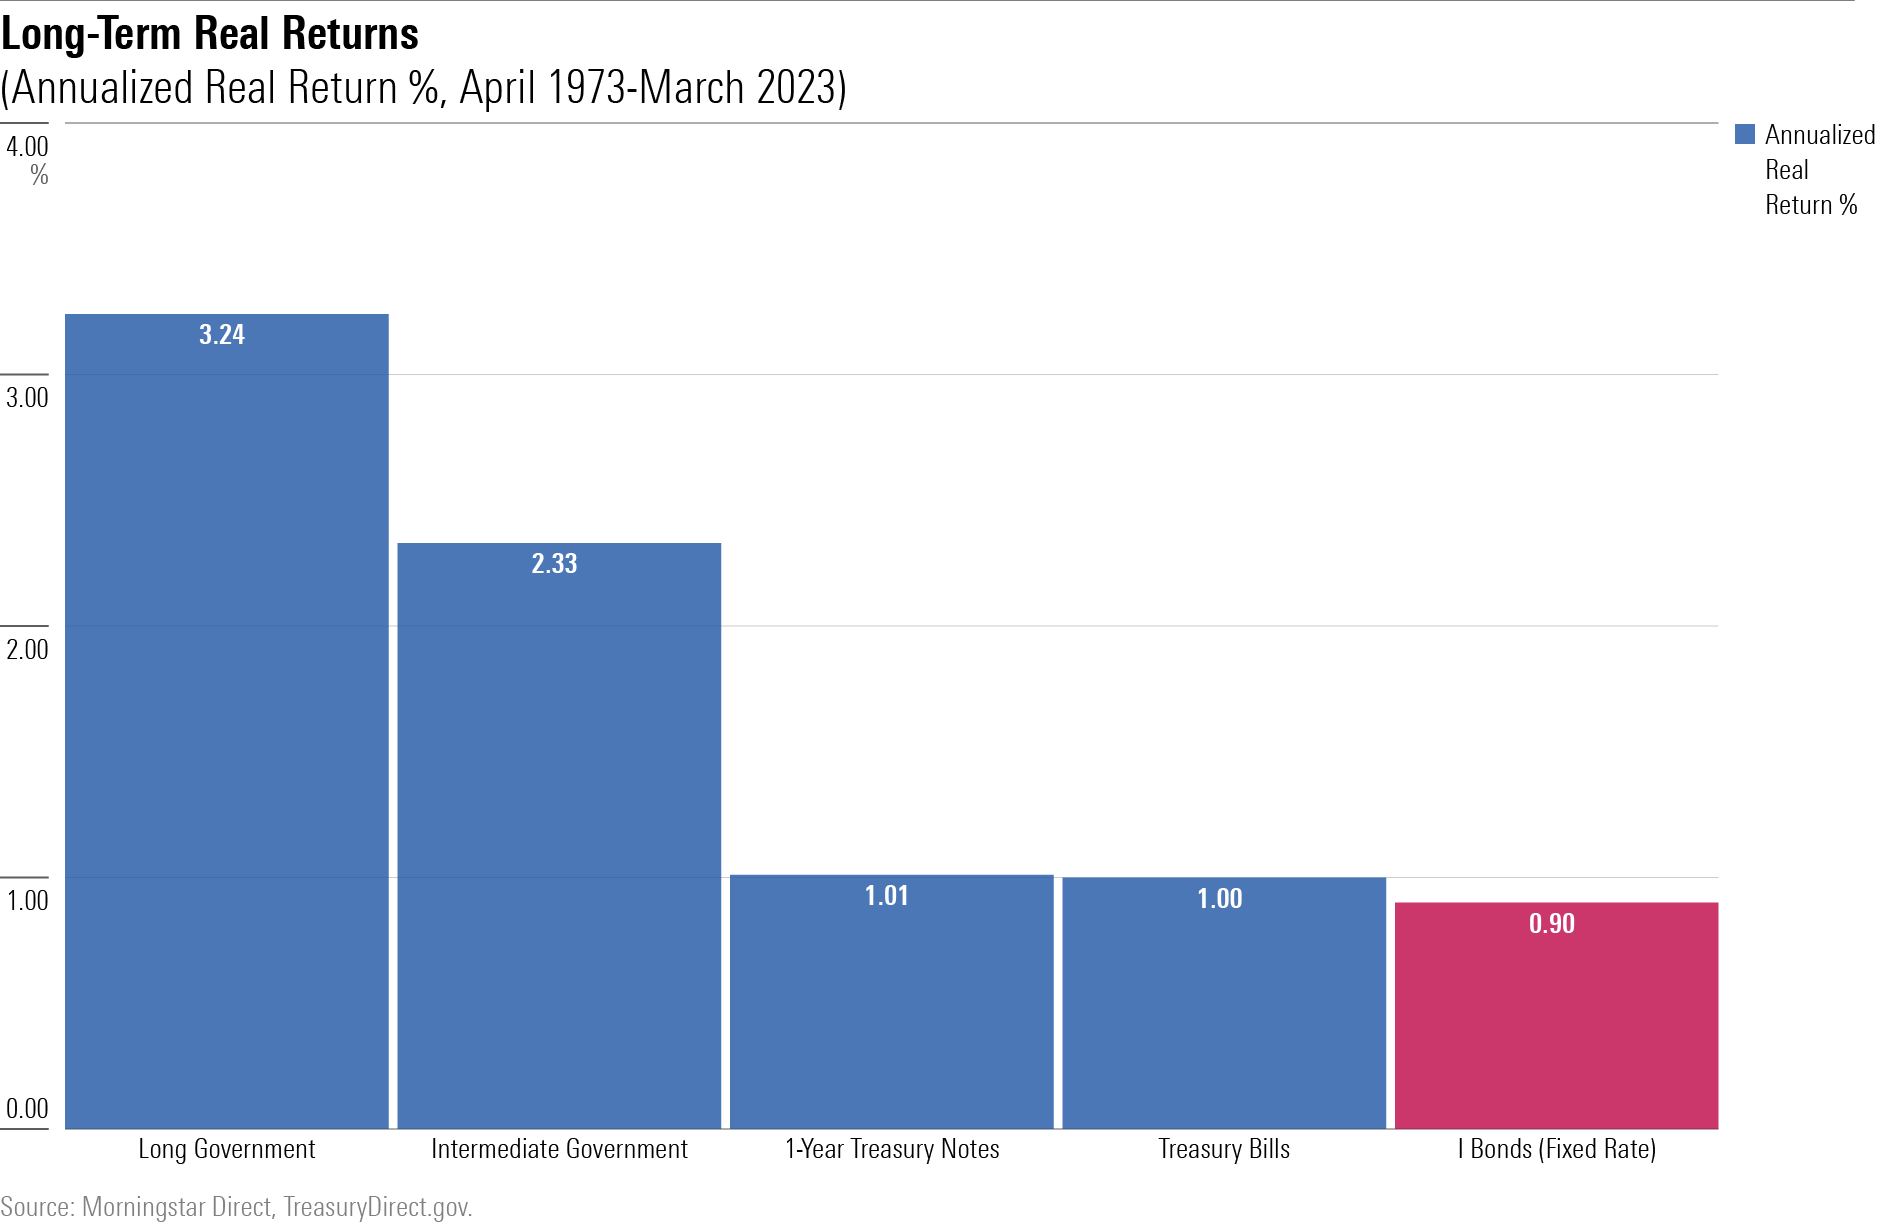 A bar chart showing the annualized after-inflation returns for 1) long Treasuries, 2) intermediate-term Treasures, 3) 1-Year Treasuries, 4) Treasury bills, and 5) what I bonds would have delivered, at their current real rate, for the 50-year period from April 1973 - March 2023.